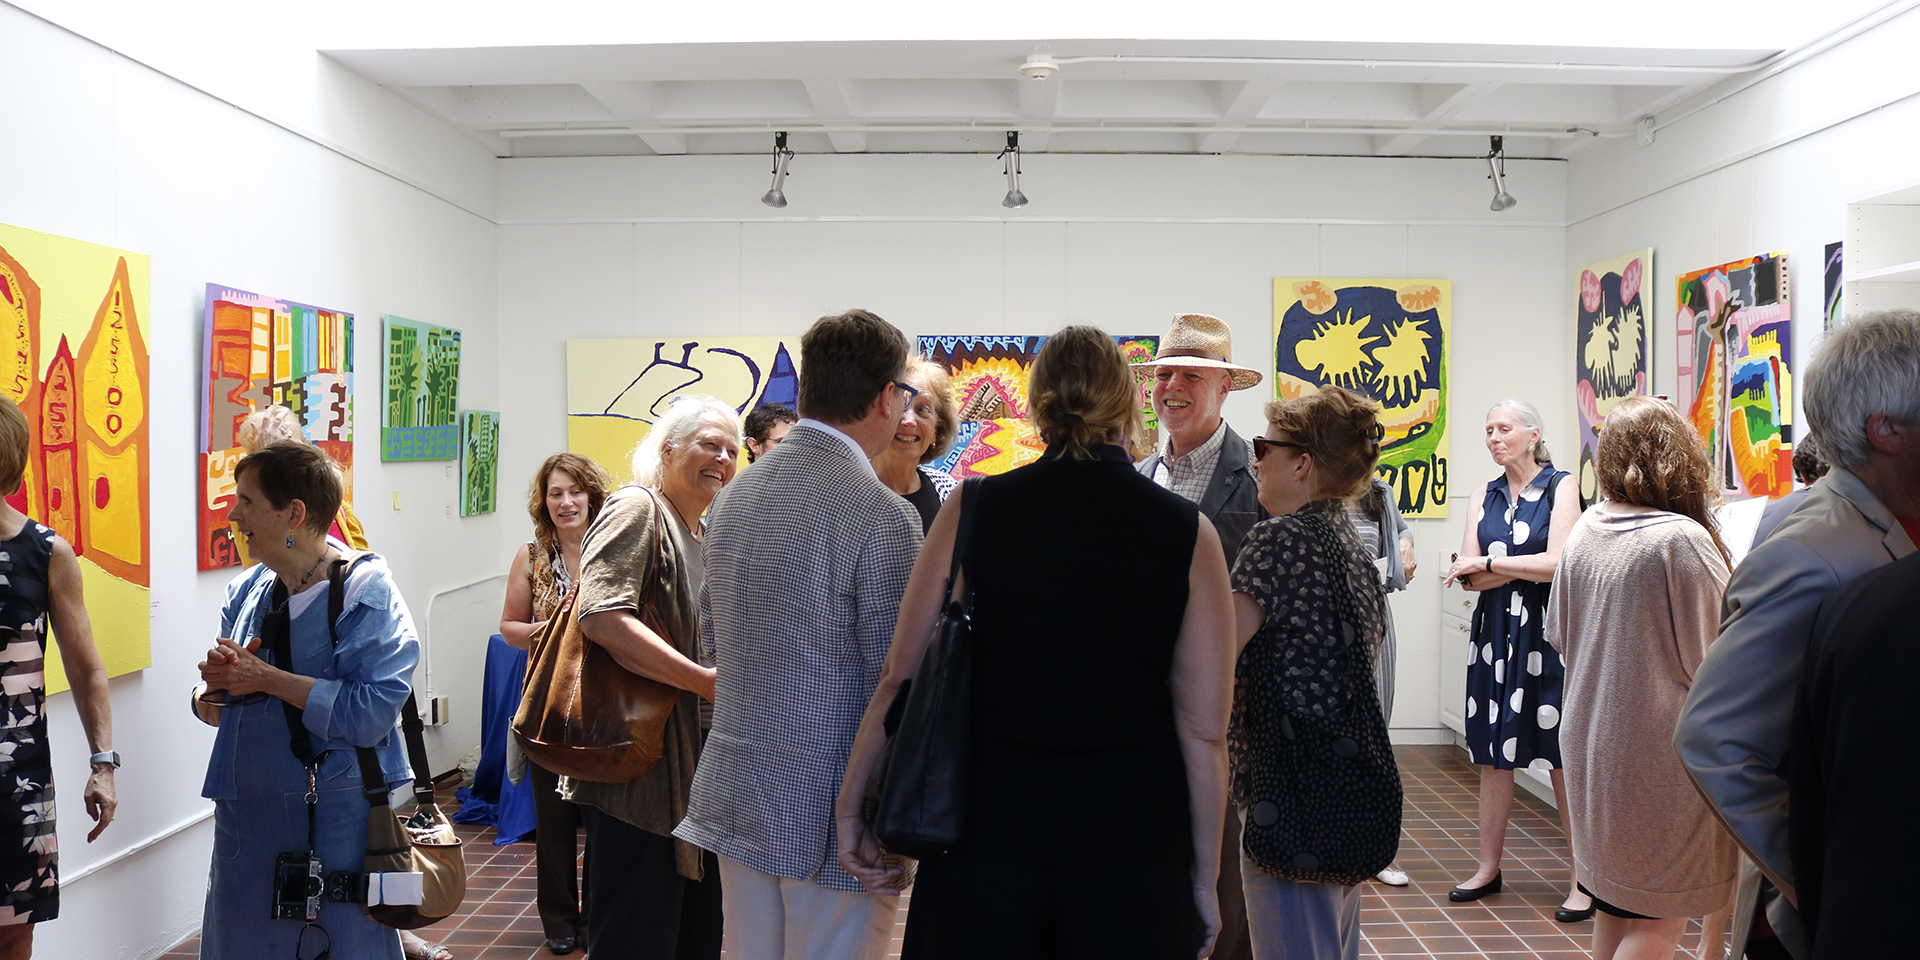 Visitors at the opening of an Open Door Gallery exhibition by Dominic Killiany